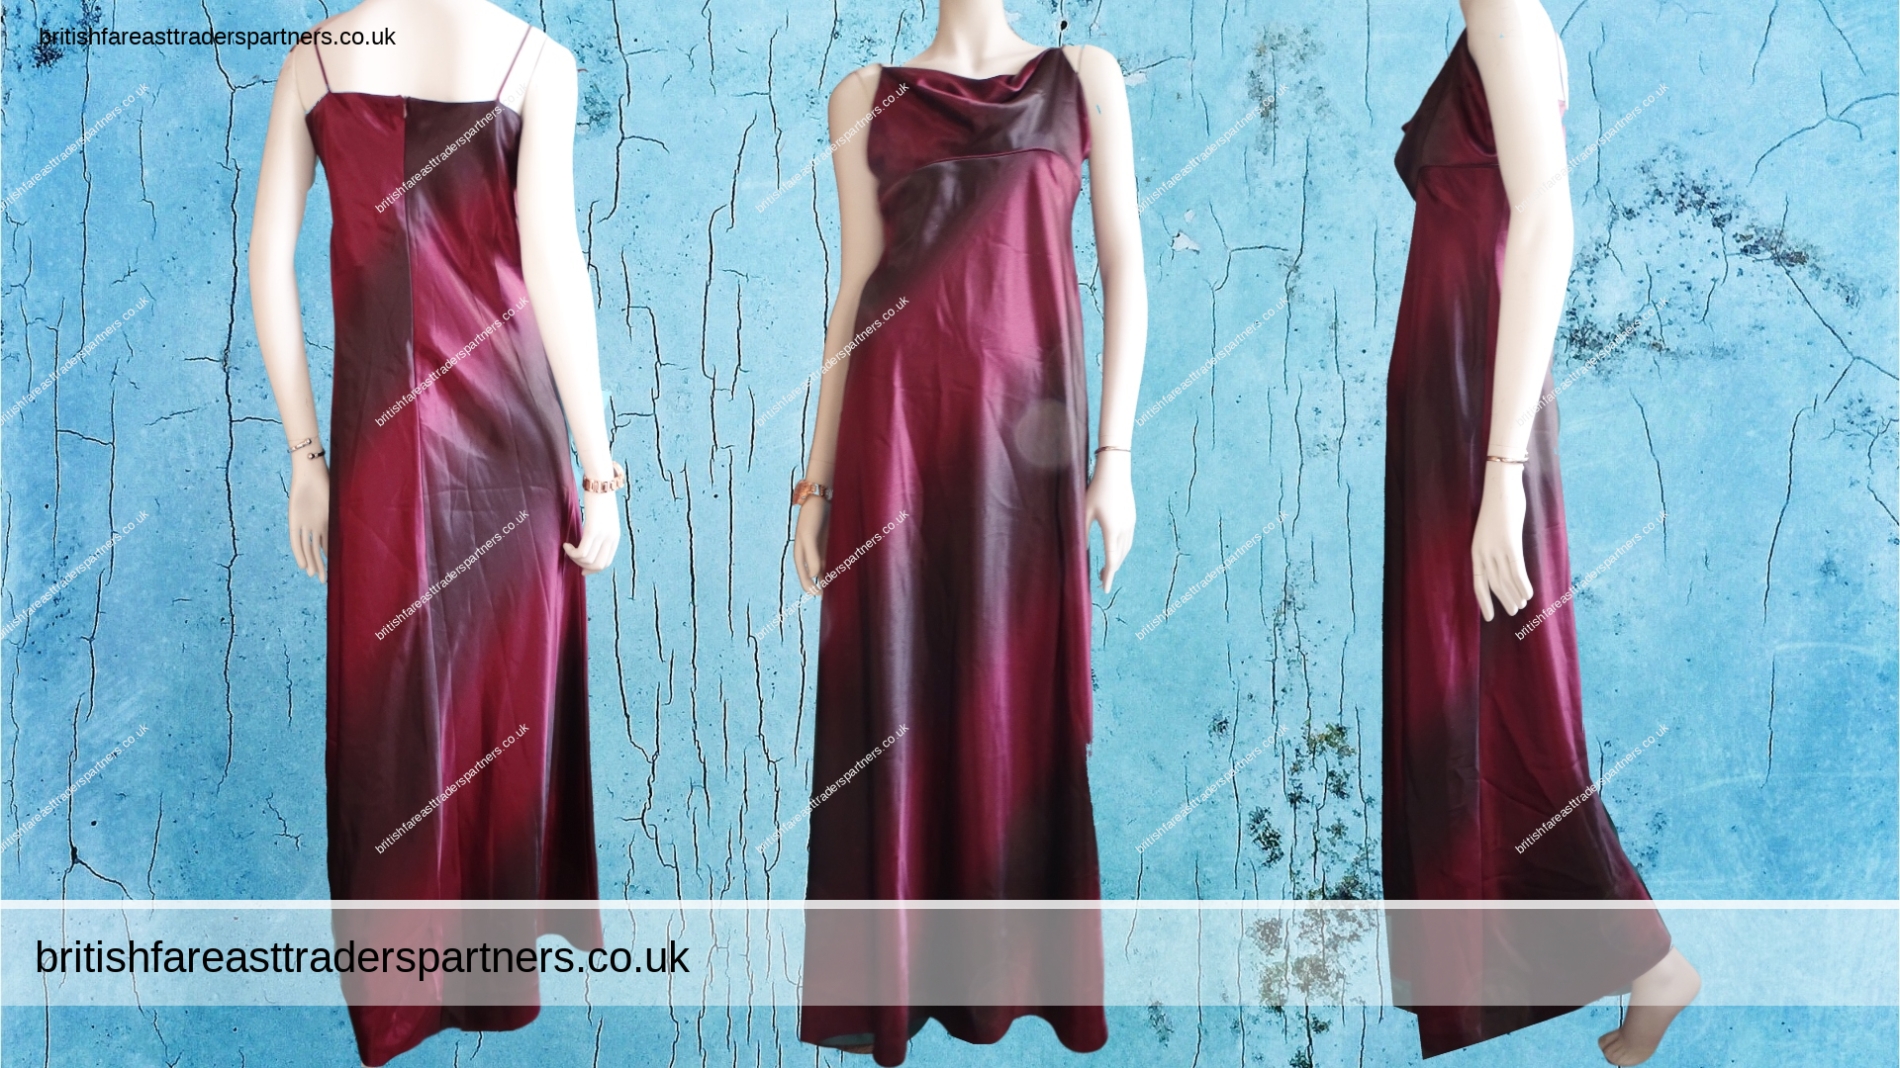 VINTAGE EVENING FORMAL BURGUNDY GOWN UK 12 EVENING PARTY FORMAL PROM MAXI DRESS UK VINTAGE | EVENINGS | PROM | FORMAL | CRUISE | GALA | FASHION |  LIFESTYLE & CULTURE